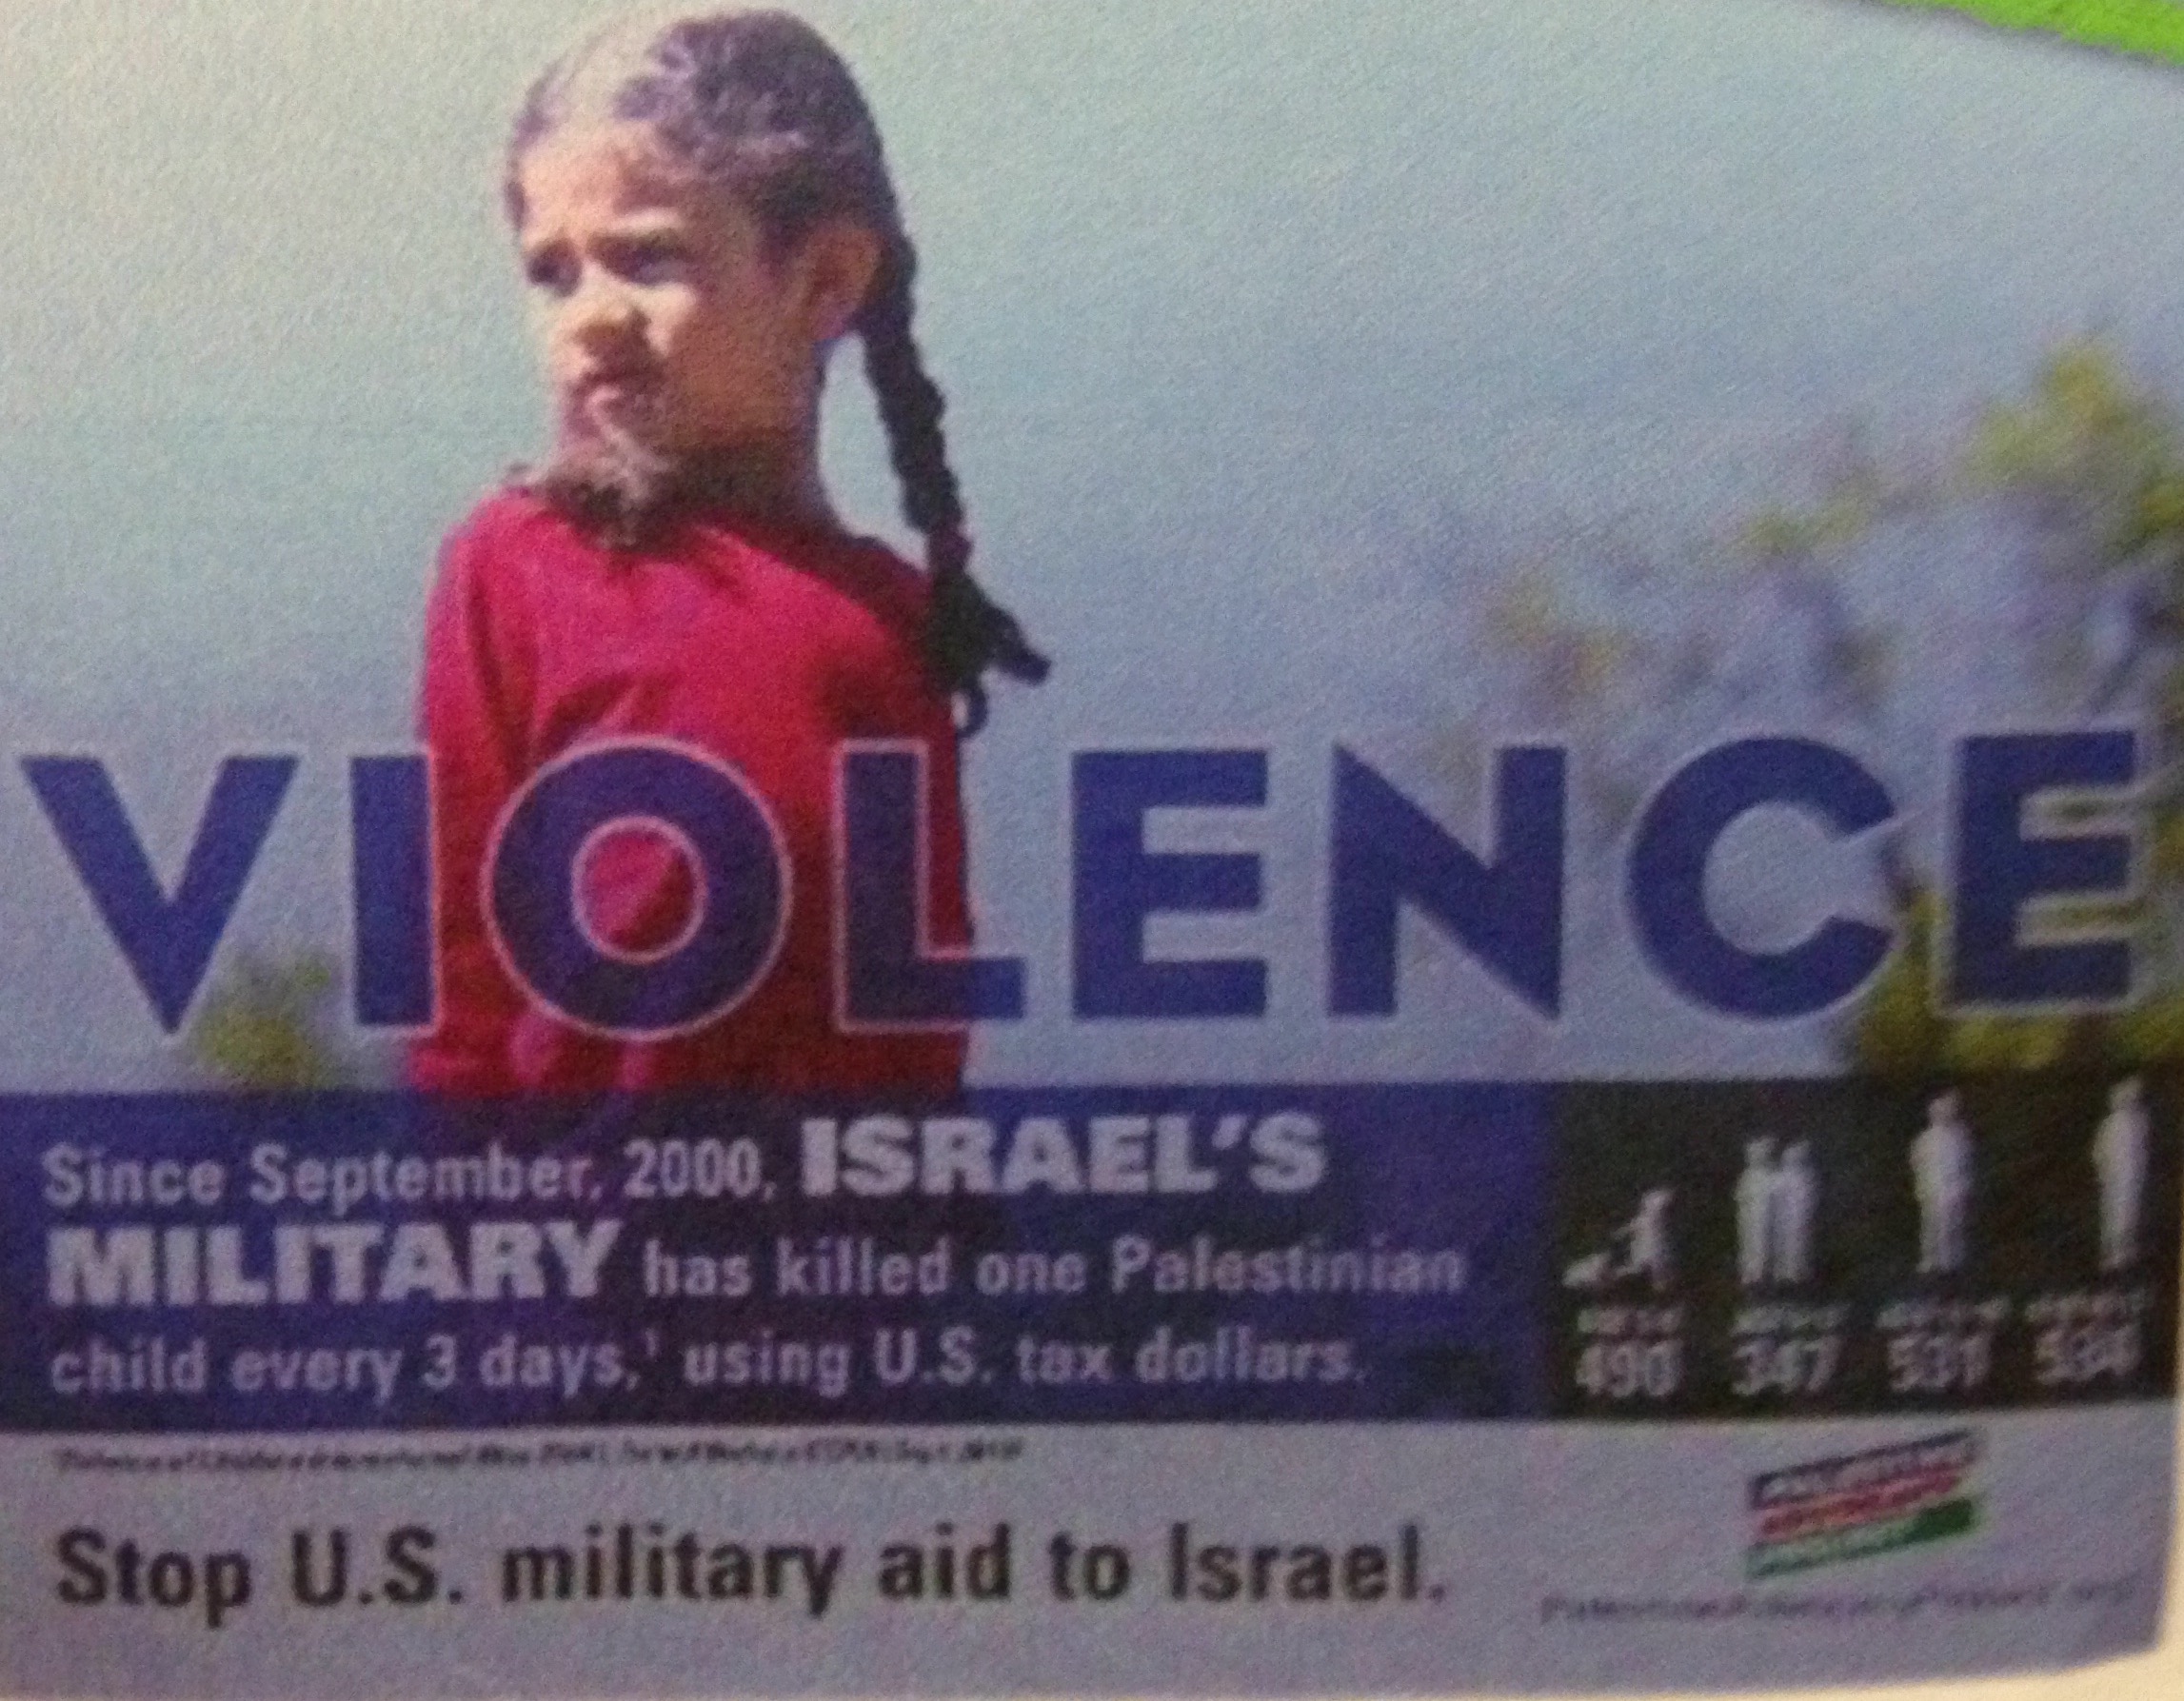 |<image-caption></noscript></p>
<p>This ad, placed by a group called the Palestine Advocacy Project, sparked controve|SPENCER BUELL/METRO” title=”|<image-caption>
<p>This ad, placed by a group called the Palestine Advocacy Project, sparked controve|SPENCER BUELL/METRO” /></div>
<p><!-- END scald=2538 --></div>
</div>
<p>Before the decision, dozens turned out to the meeting of the MBTA fiscal and management control board to offer passionate opposition to the ad and the policy that allowed it to run.</p>
<p>Speakers claimed the ad promoted violence against Jewish people and called it inaccurate.
<p>Charles Jacobs, president of the Watertown-based Americans for Peace and Tolerance, called it “slander against the Jewish people” and said it would “incite hatred against my community.”
<p><em><strong>RELATED: <a href=